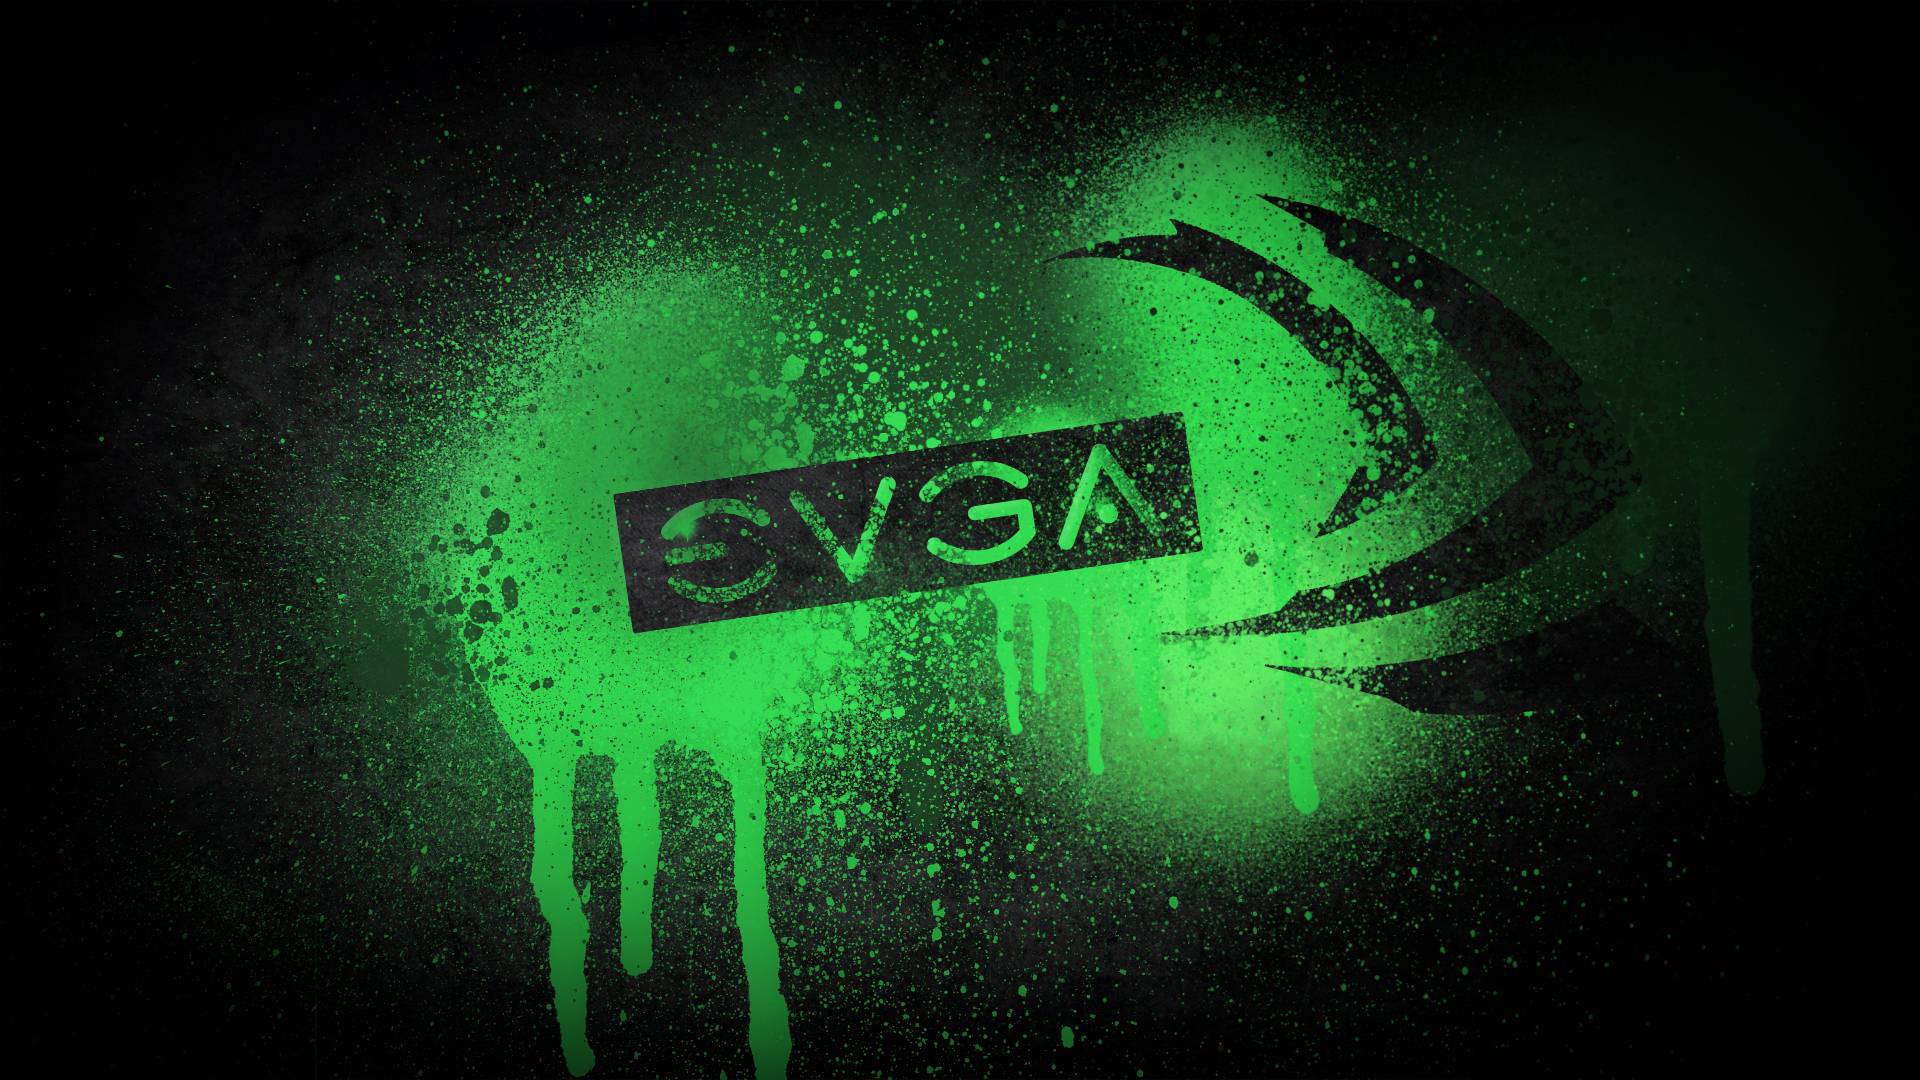 Free Download Evga Wallpapers Hd Wallpapercraft 1920x1080 For Your Desktop Mobile Tablet Explore 76 Evga Wallpapers Evga Wallpaper 1920x1080 Evga 4k Wallpaper Evga Hd Wallpapers